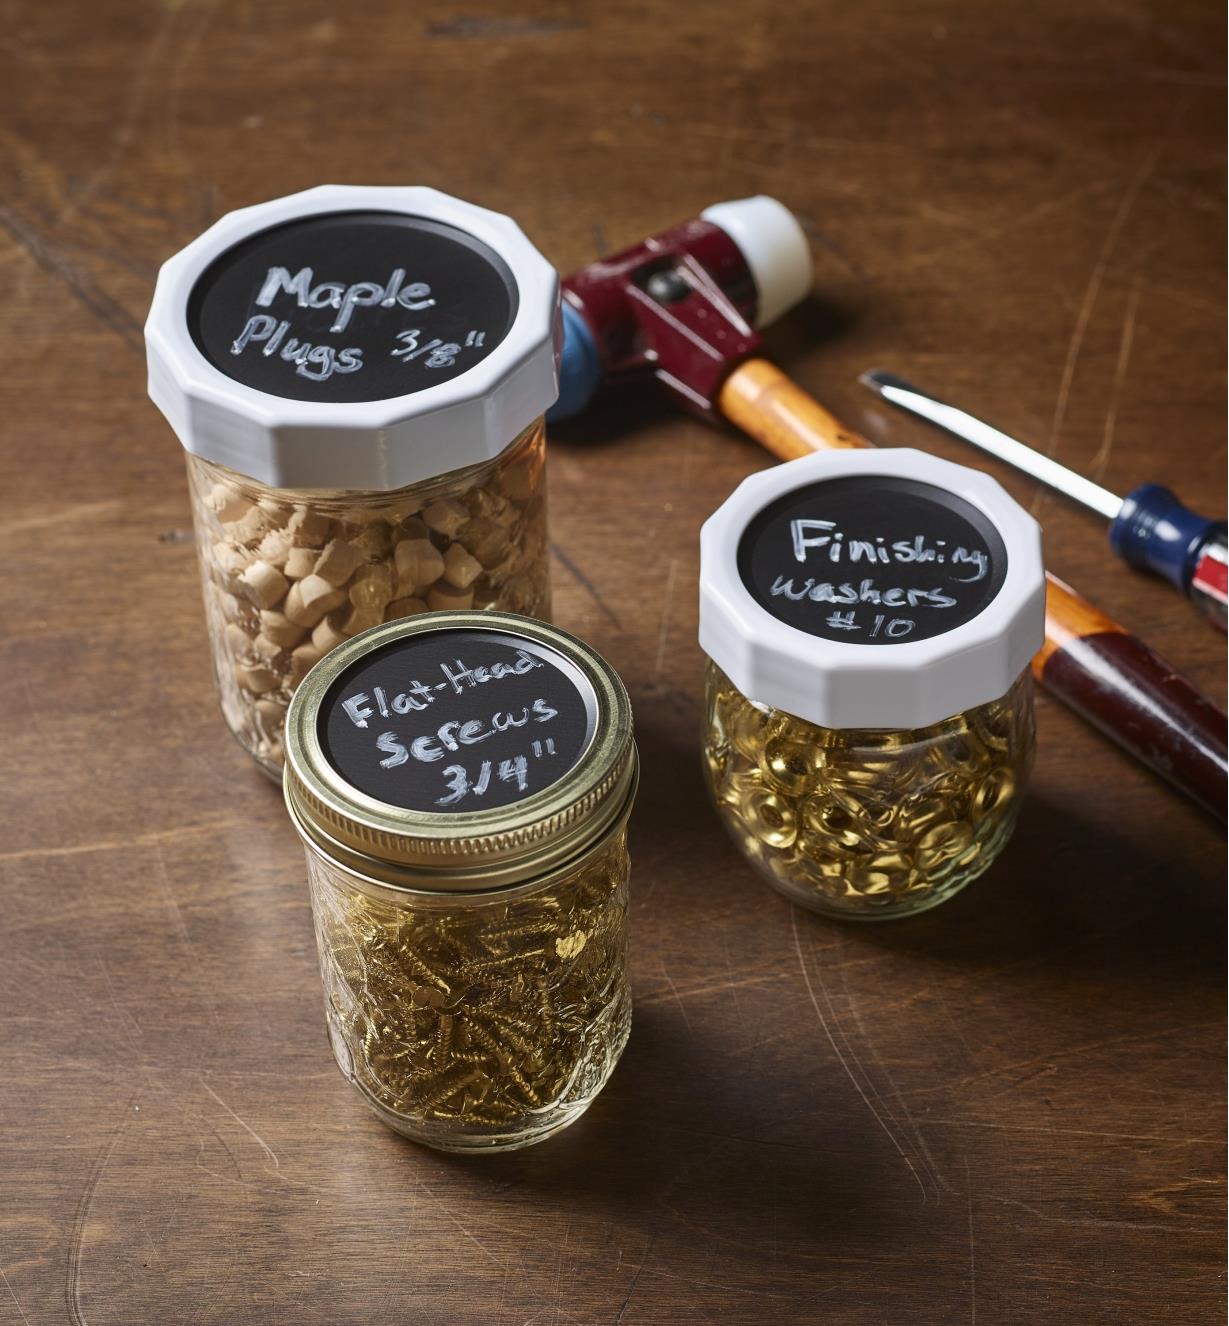 Repurposed canning jars filled with hardware and wood items have labelled chalk top lids to identify contents